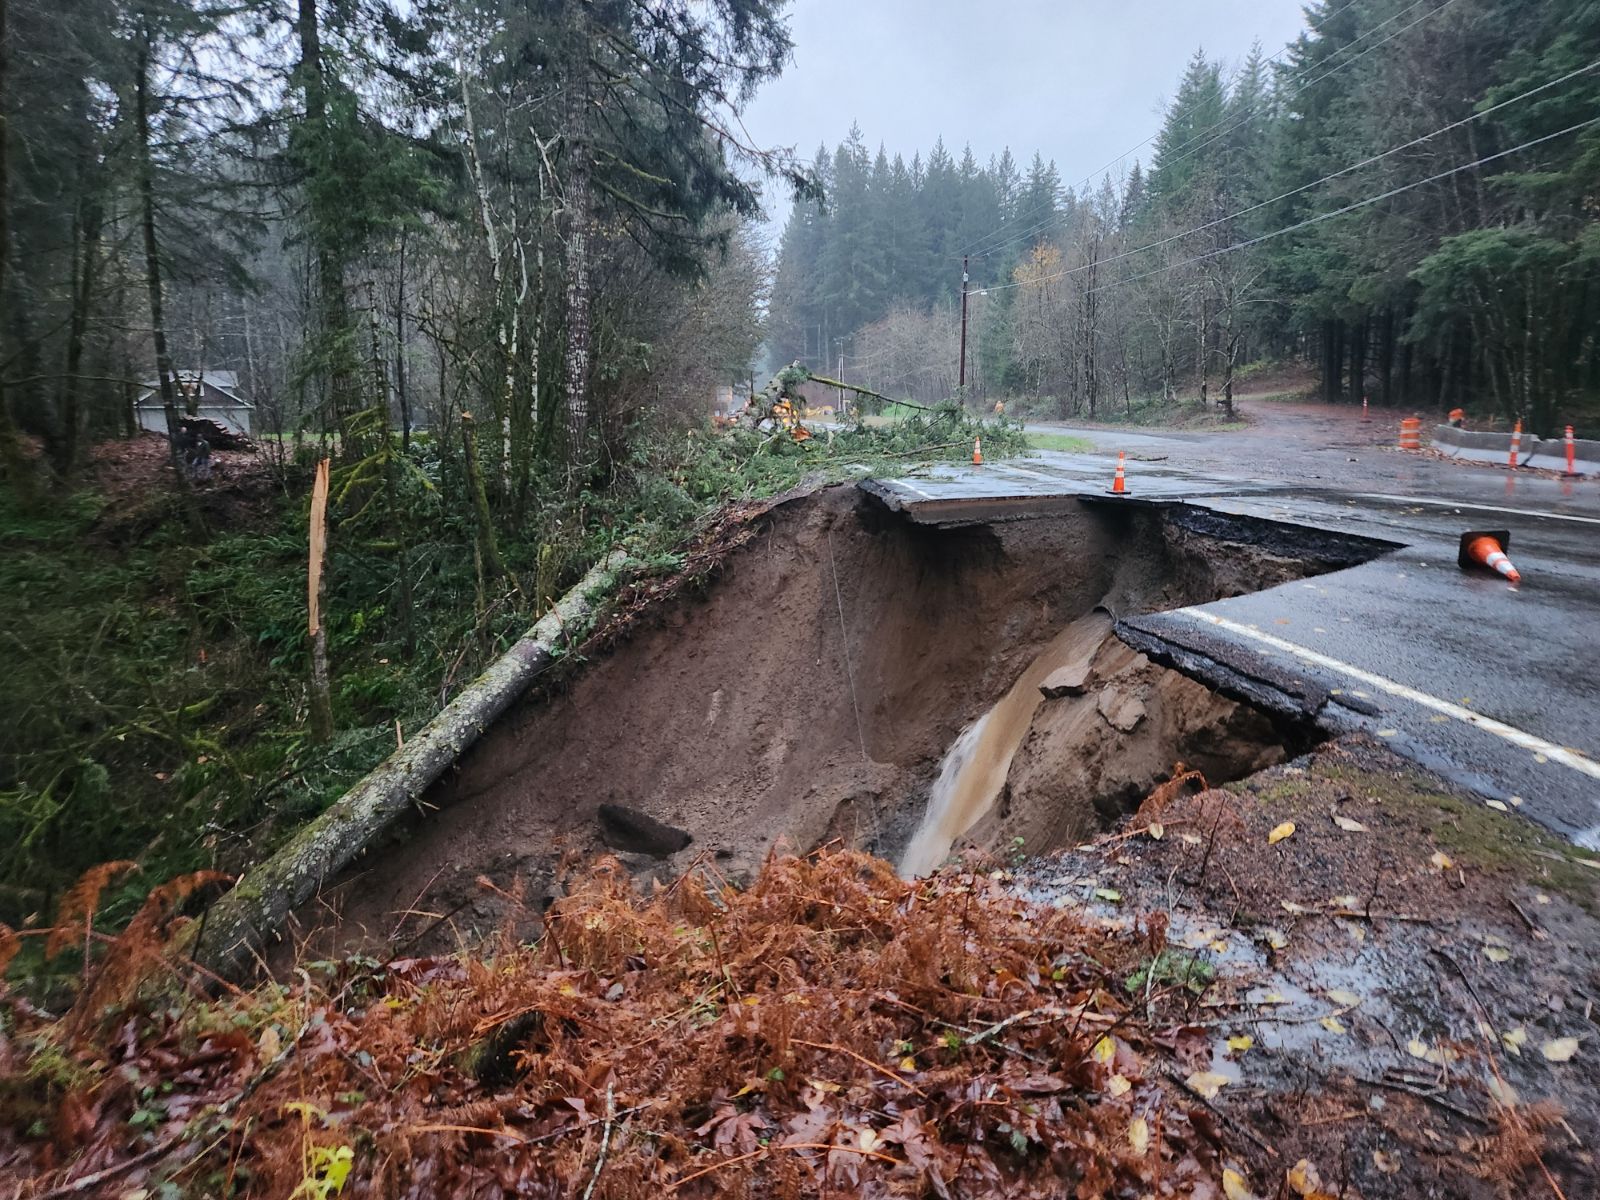 Lewis River Highway is closed in both directions near Cougar.